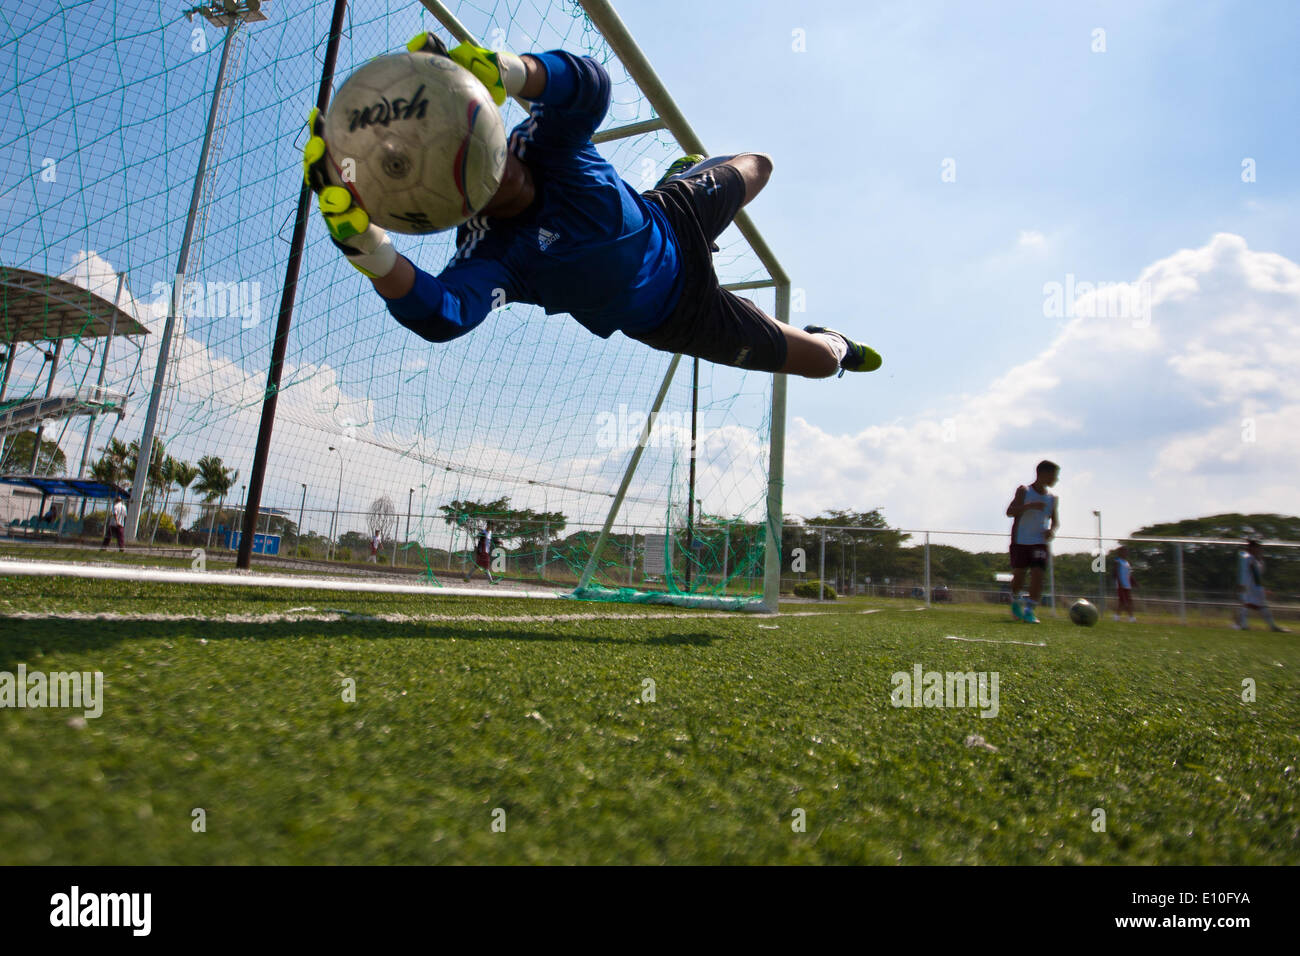 (140521) -- VALENCIA, May 21, 2014 (Xinhua) -- Image taken on May 17, 2014 shows a kid that belongs to one of the 11 seats of the Soccer School 'Juan Arango' Foundation taking part in a training in Valencia, Carabobo state, Venezuela. The Foundation seeks to catch, promote and encourage the practice of soccer among the youngest kids.  (Xinhua/Carlos Ramirez) (da) (rt) Stock Photo